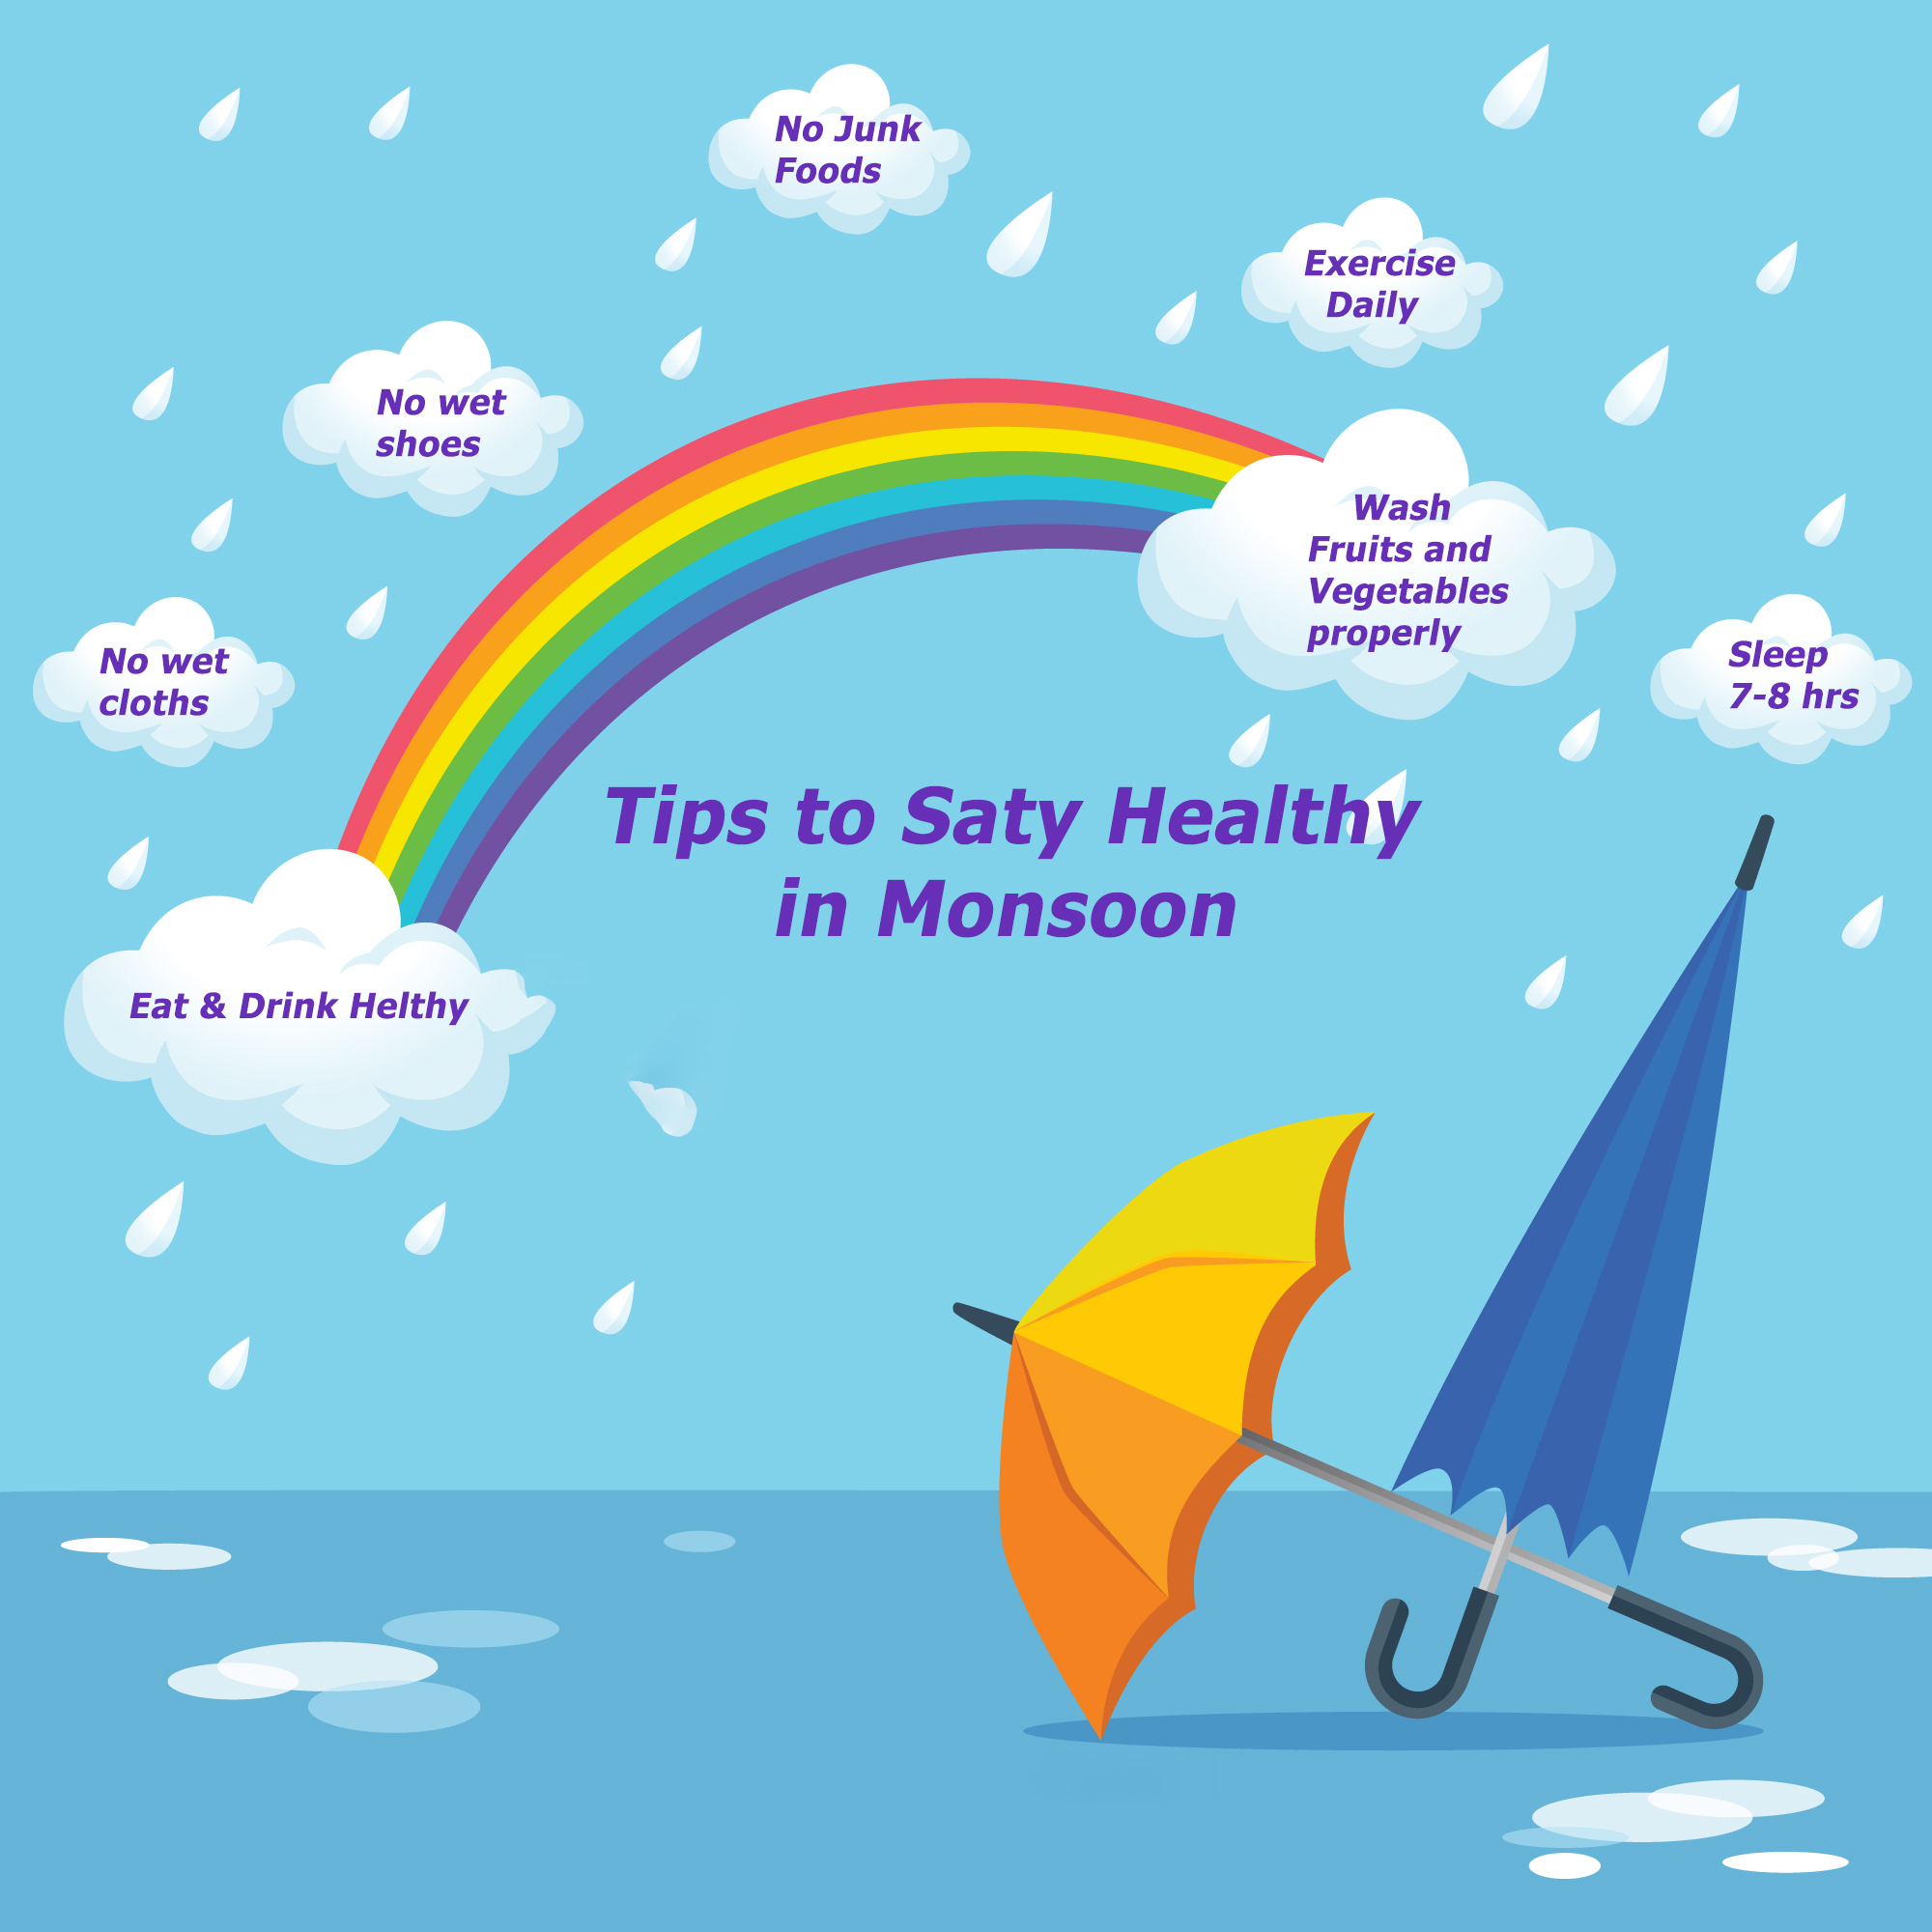 Tips on how to stay healthy in Monsoon